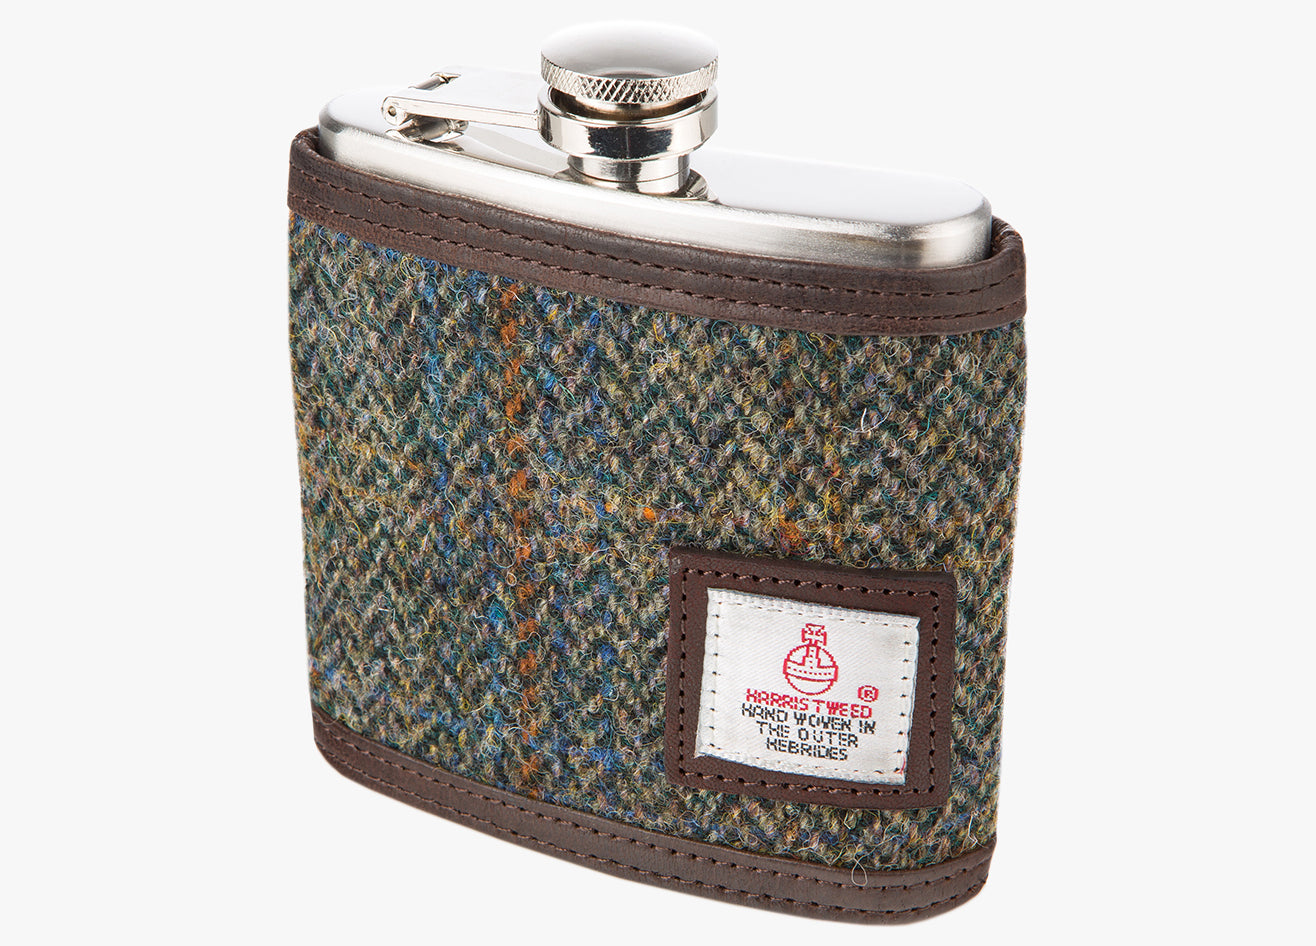 Harris Tweed Hip flask in green and blue and brown. The cover is Harris tweed and leather. The hip flask holds six ounces and is made from stainless steel. The Harris tweed is green, blue and brown herringbone, it has brown leather at top and bottom of the cover. It also has a small square Harris Tweed logo on the bottom right.